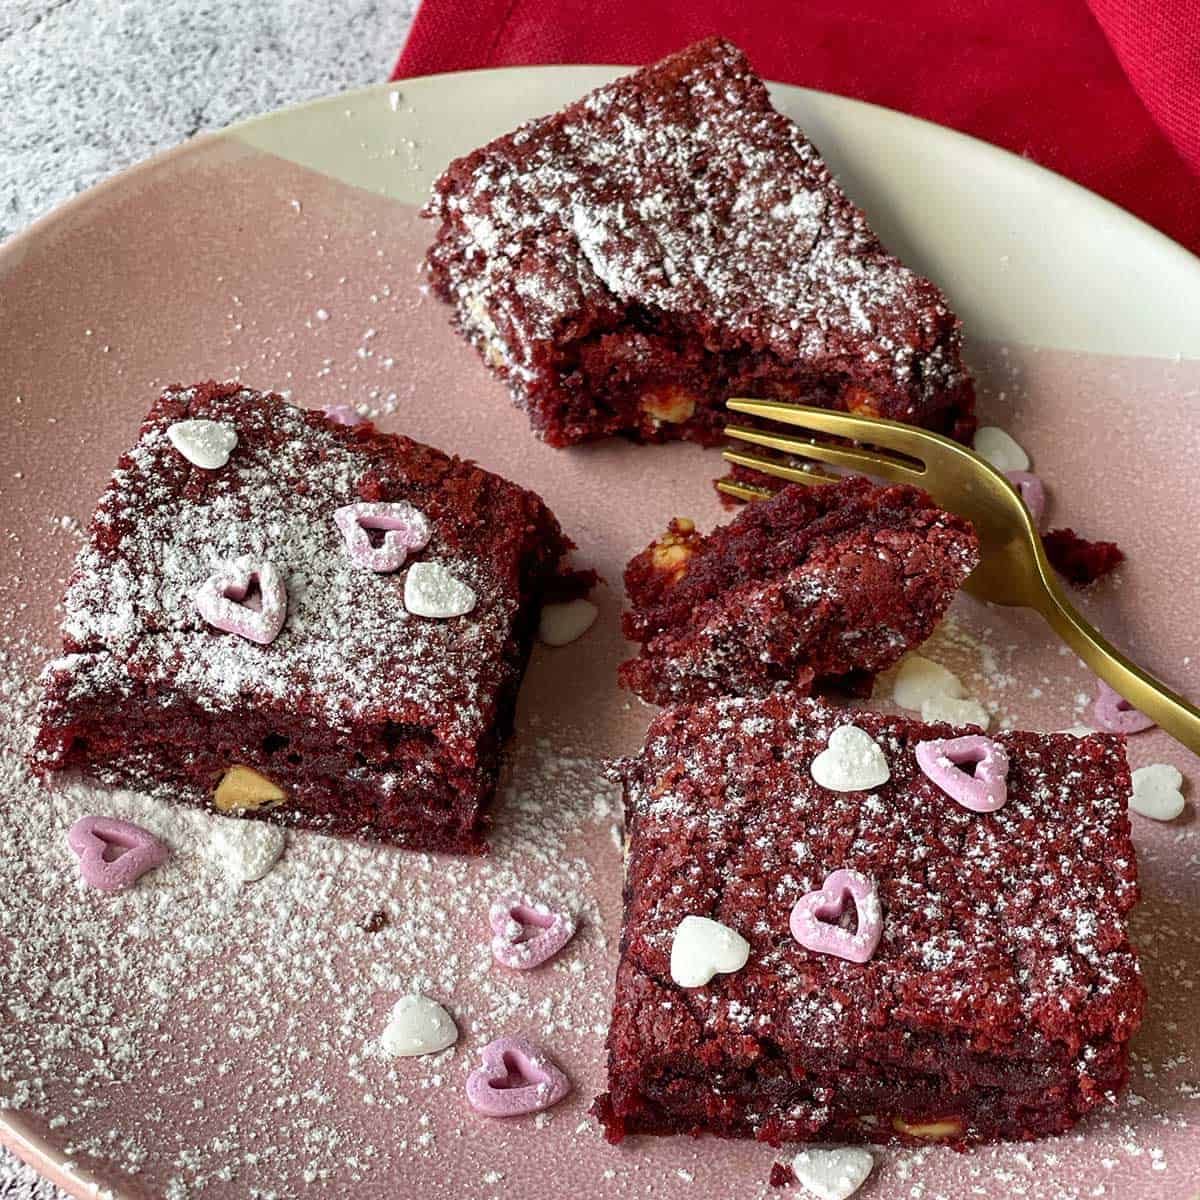 3 pieces of red velvet brownie on a pink plate.